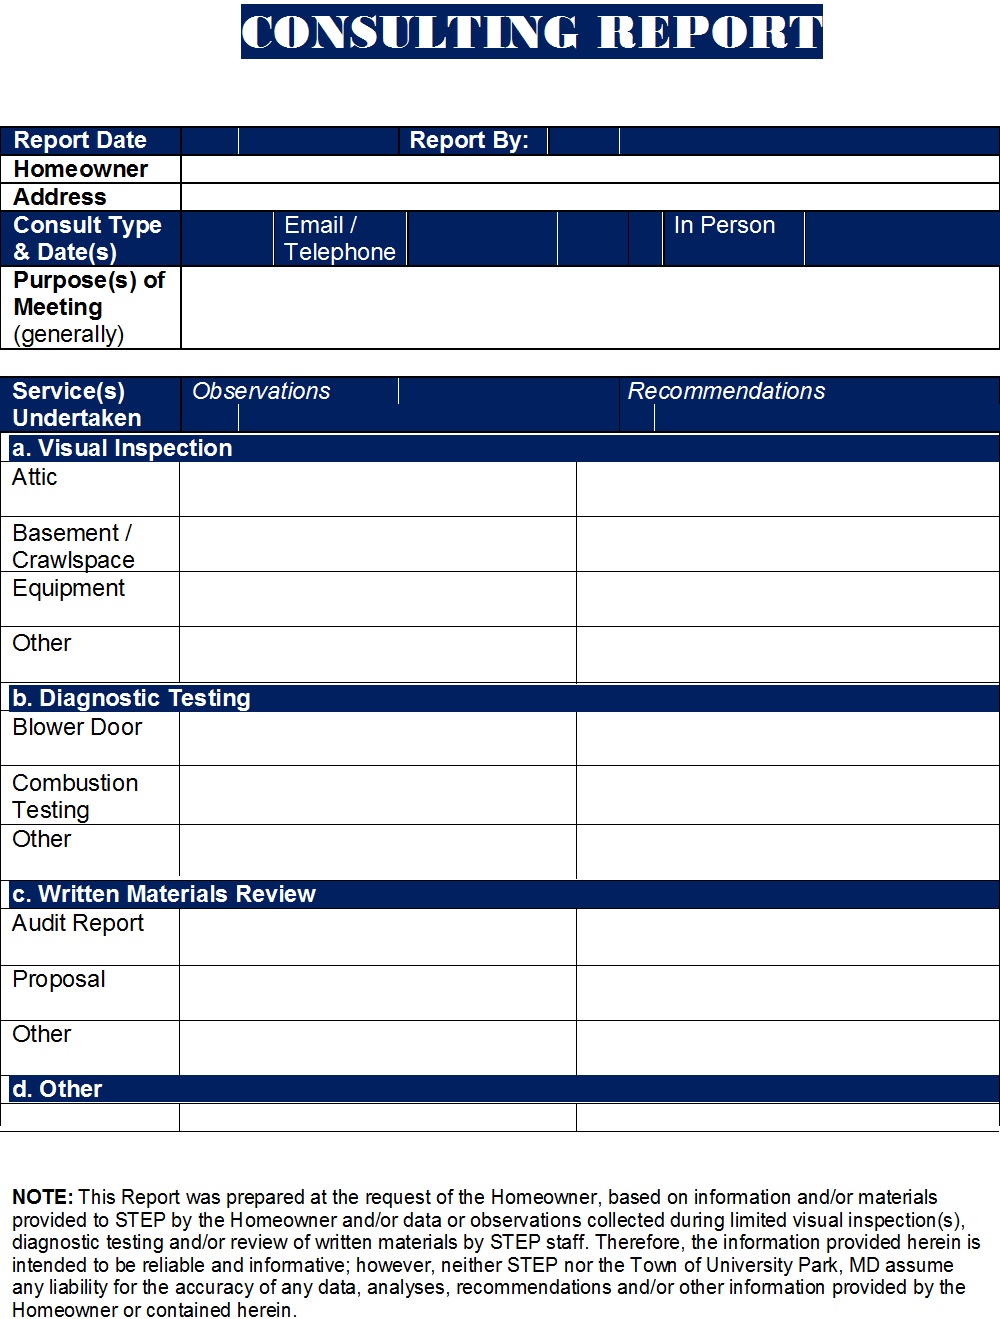 Consulting Report Templates - Free Report Templates